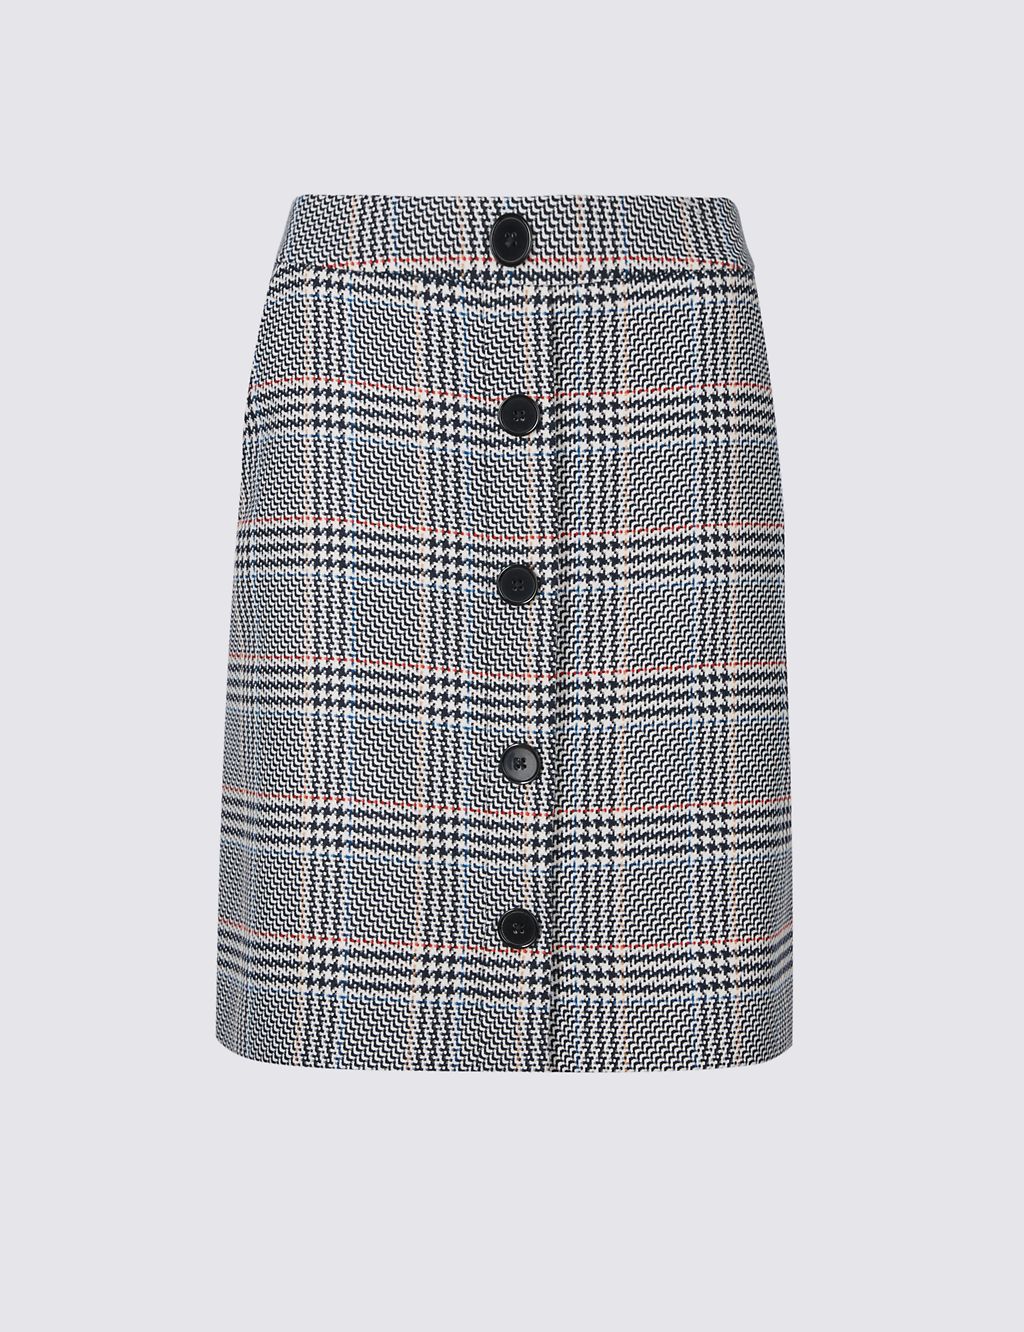 Checked A-Line Mini Skirt 1 of 7